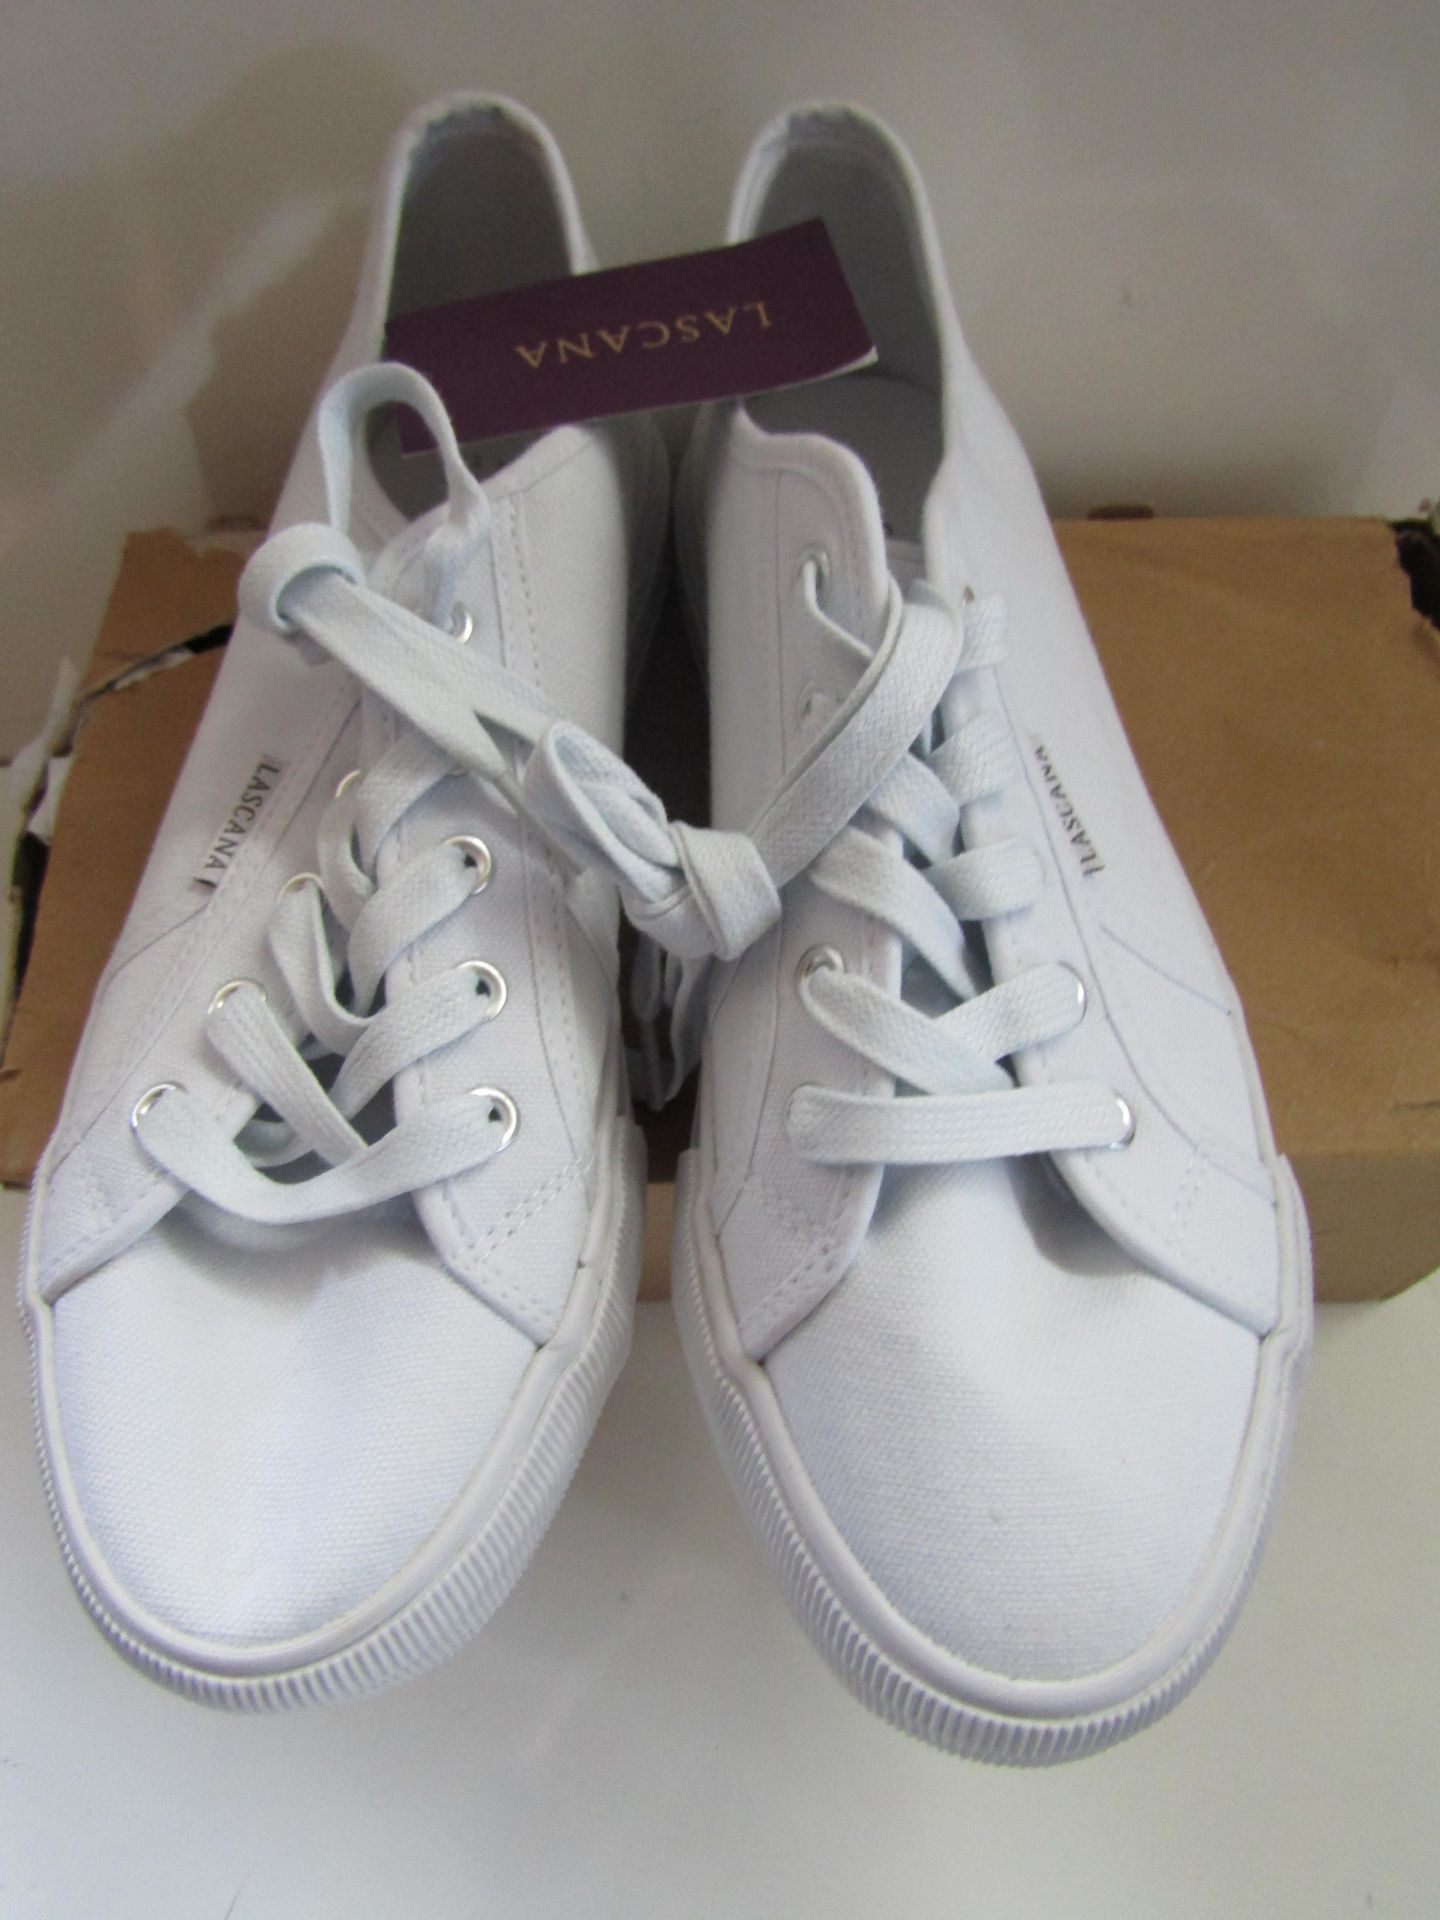 Lascana Sneaker White Size 41 New & Boxed - Image 3 of 3